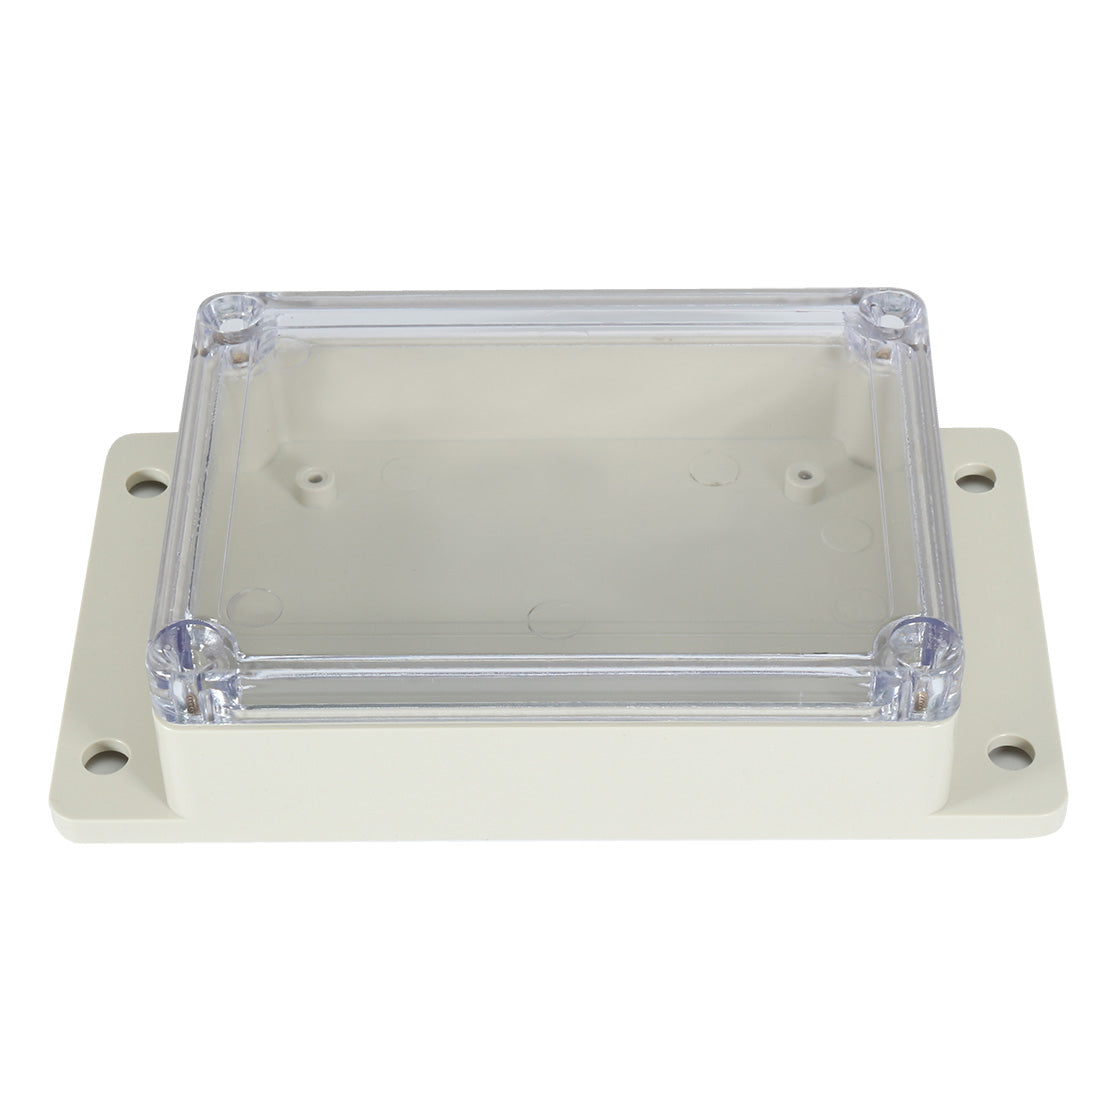 uxcell Uxcell 4.5"x3.4"x1.4"(115mmx85mmx35mm) ABS Junction Box Universal Project Enclosure w PC Transparent Cover